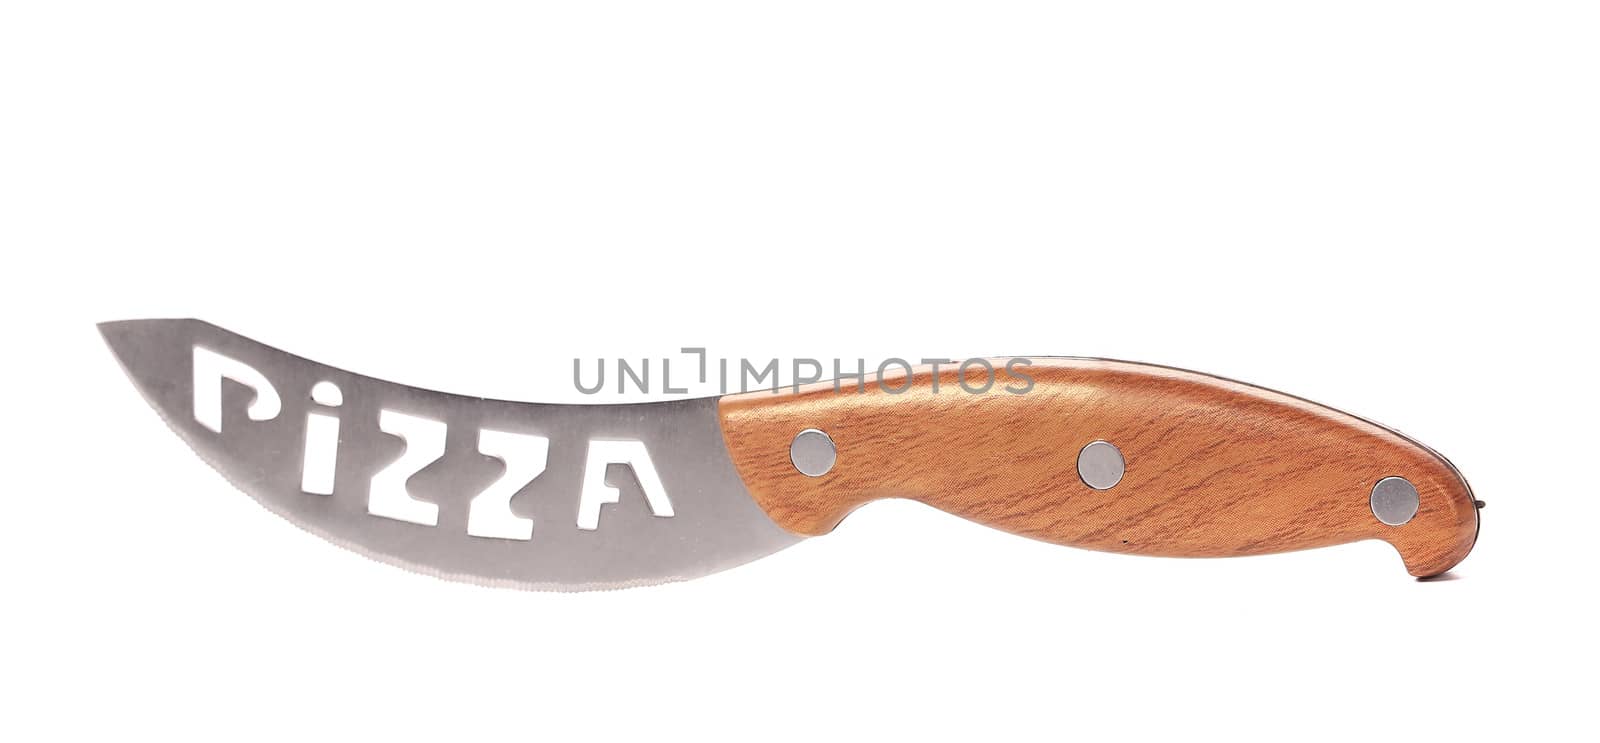 Knife for cutting pizza by indigolotos